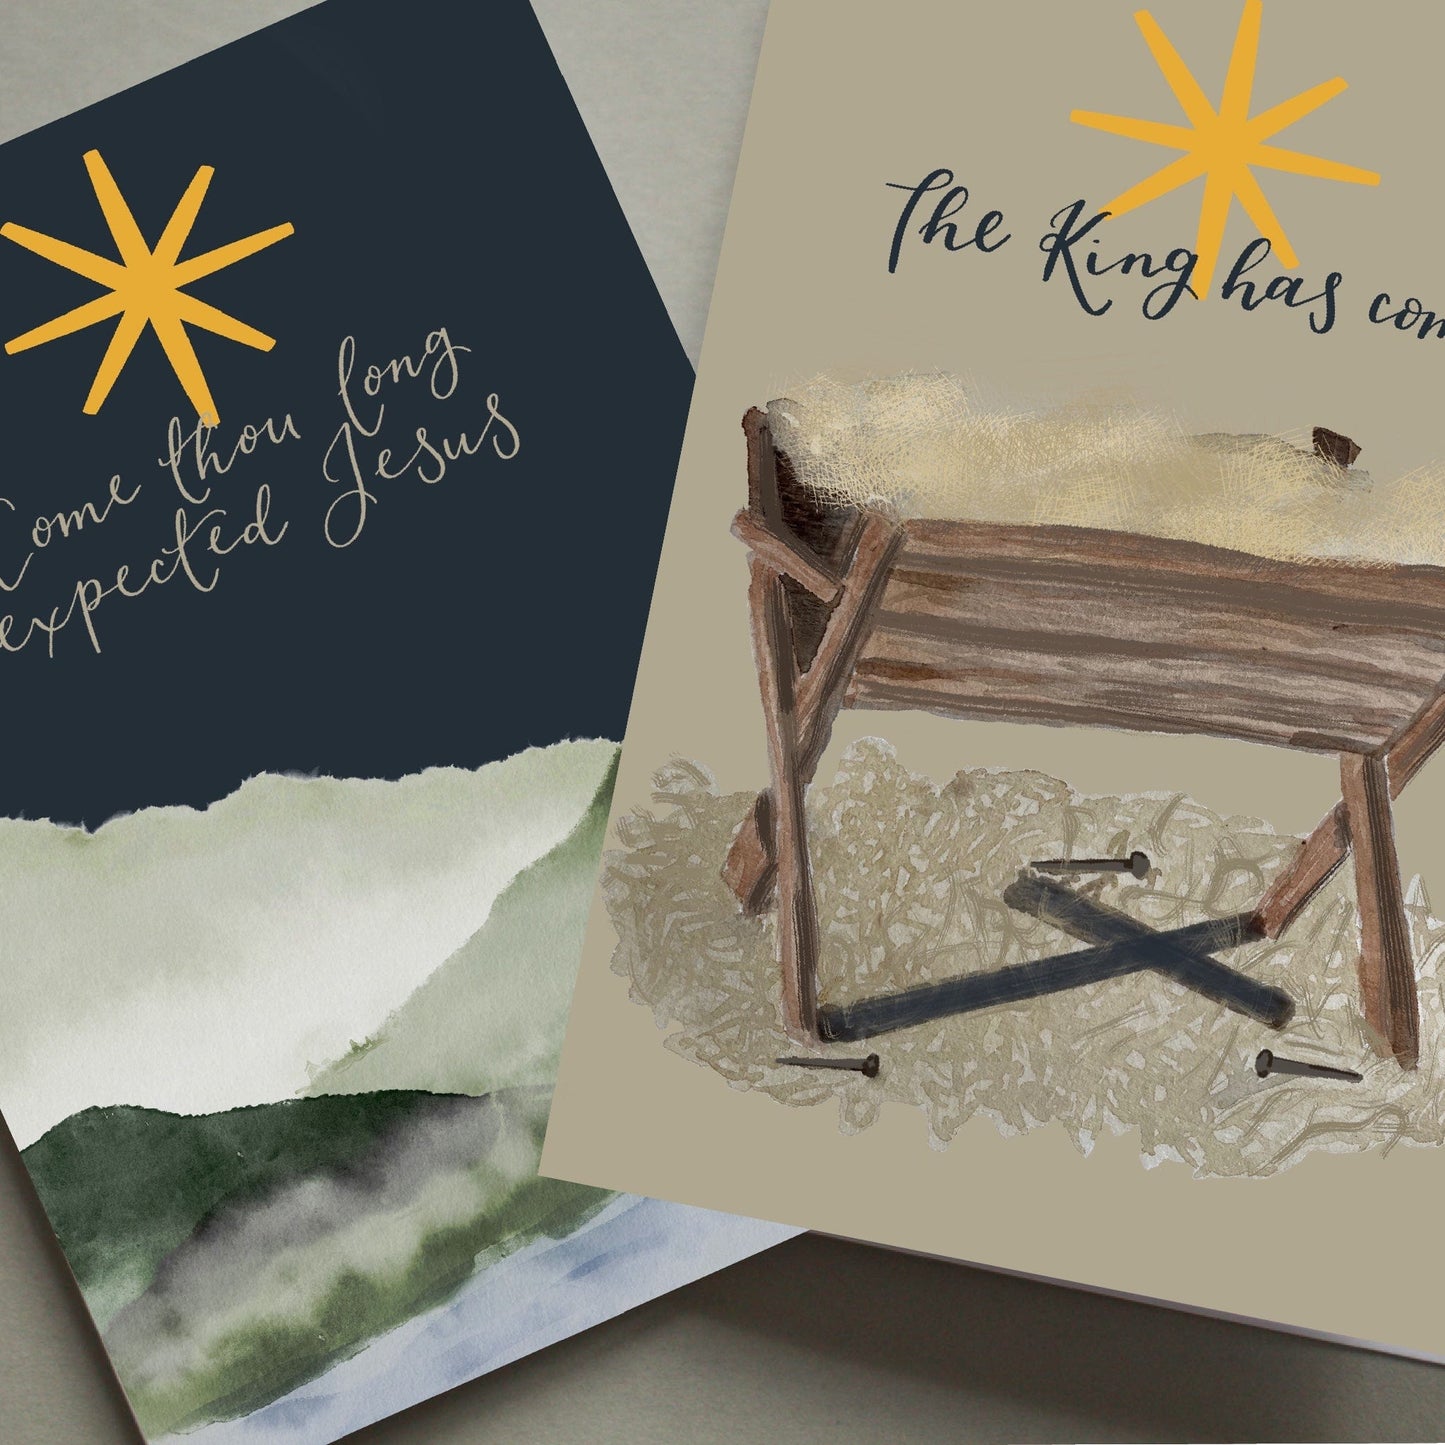 Set of Expectant Christian Christmas cards Cards And Hope Designs   